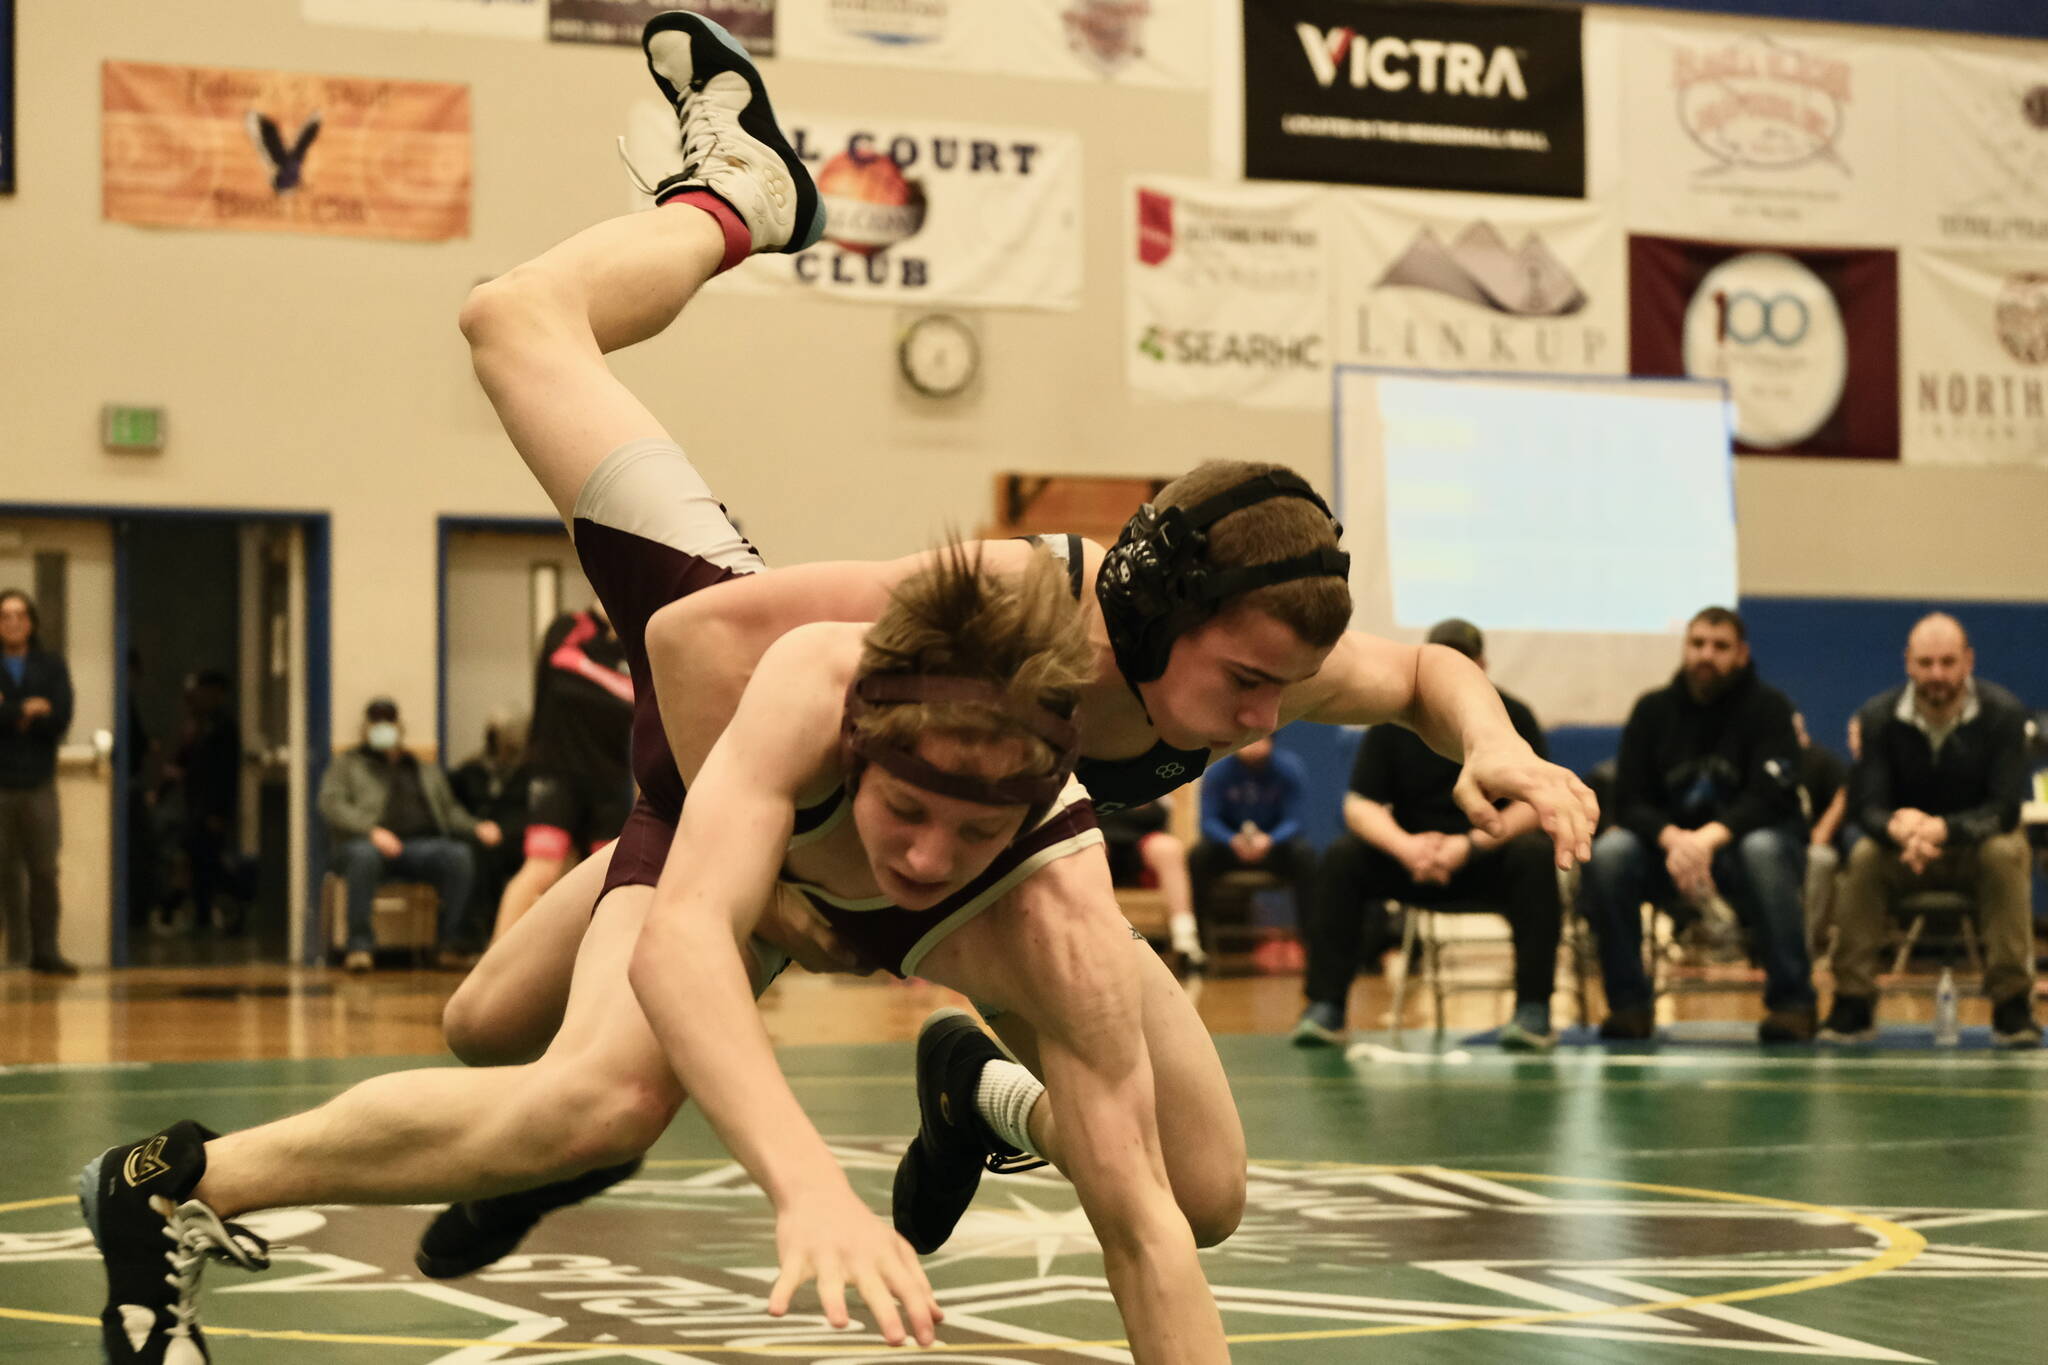 Thunder Mountain High School grappler Jed Davis, a Juneau-Douglas High School: Yadaa.at Kalé freshman, takes down Ketchikan High School sophomore Jack Styles in the 125-pound Division I championship match of the 2023 ASAA Region V wrestling tournament Saturday at TMHS. Davis won by fall. (Klas Stolpe/ For the Juneau Empire)